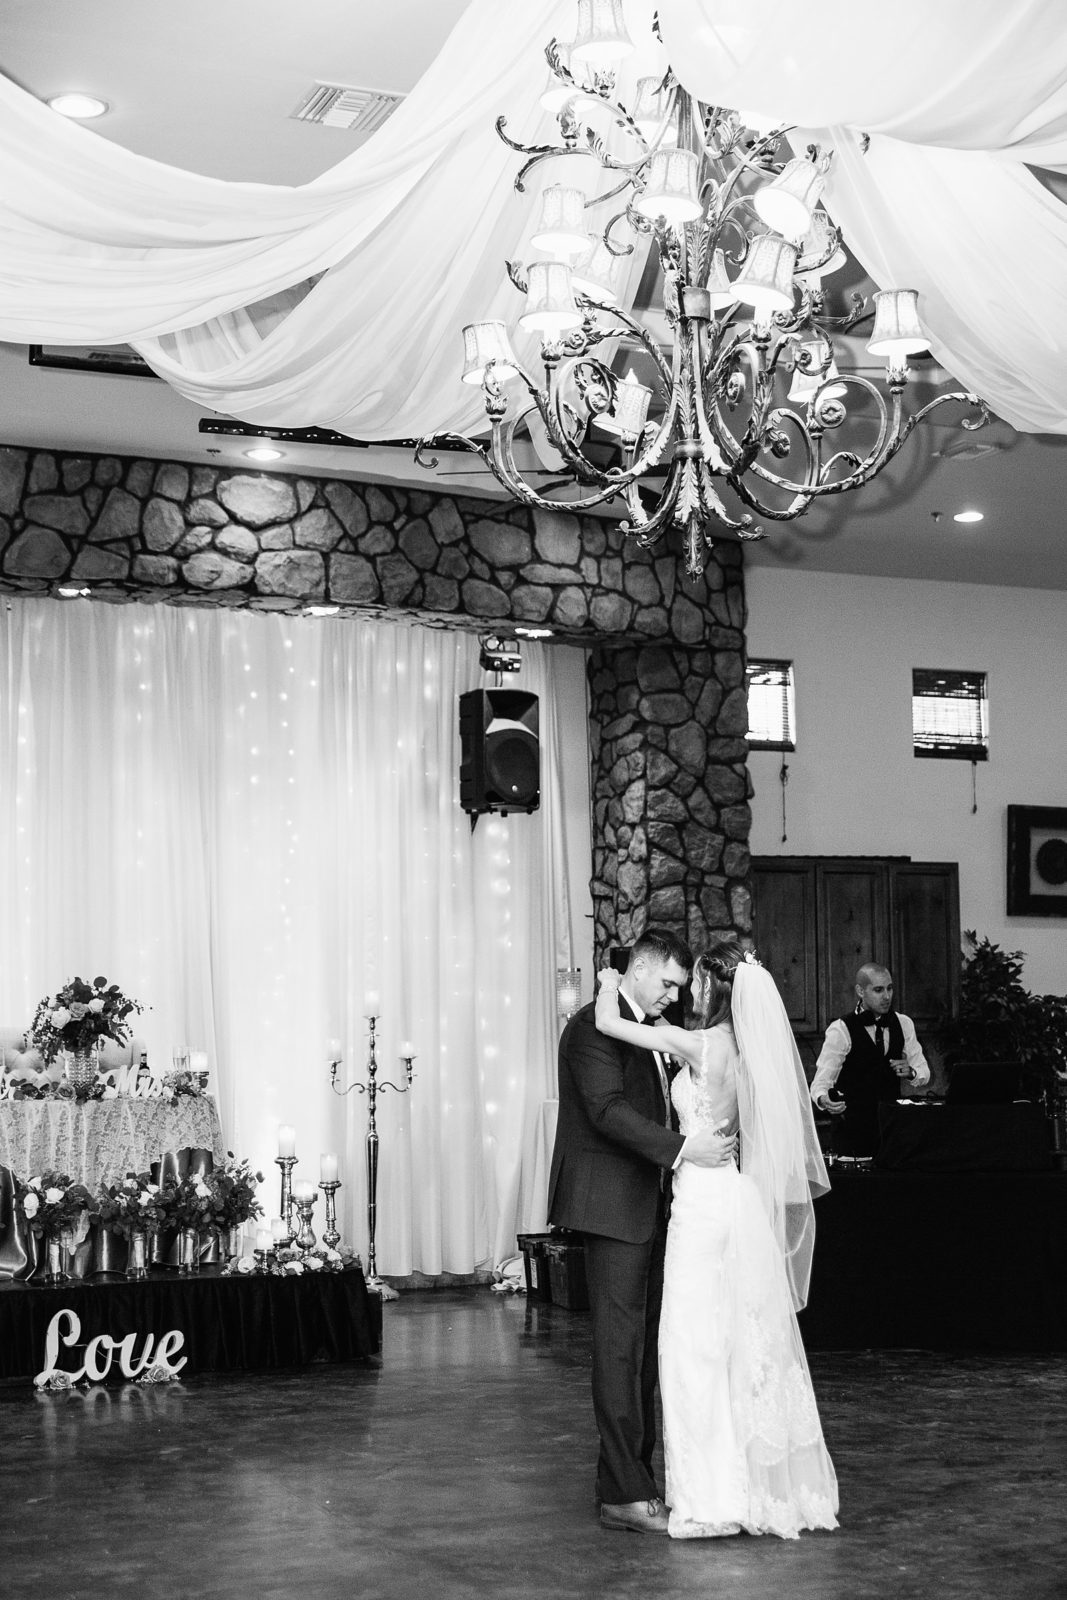 Bride and Groom sharing first dance at their Superstition Manor wedding reception by Arizona wedding photographer PMA Photography.